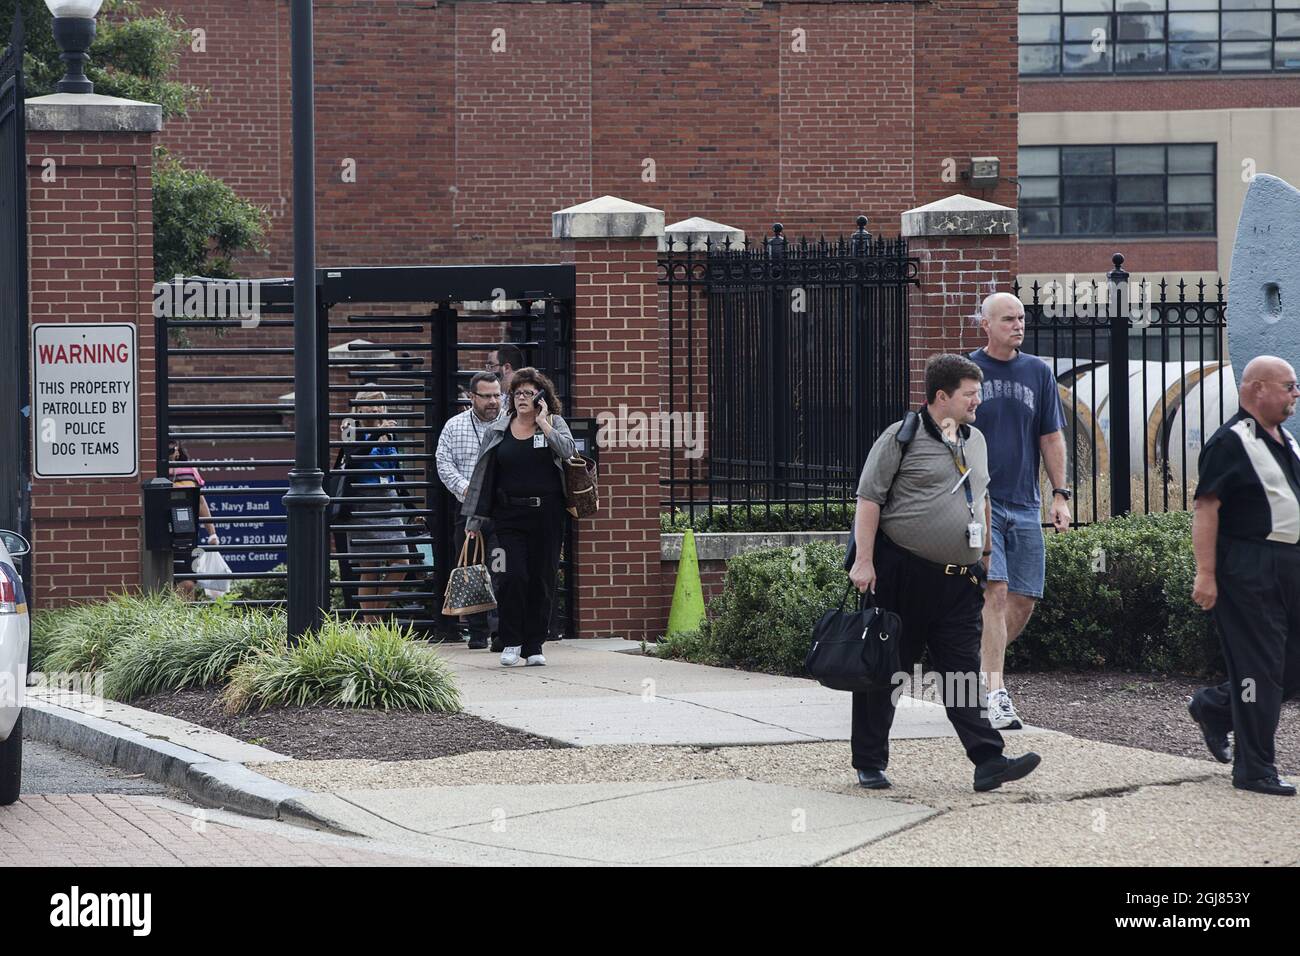 STOCKHOLM 2013-09-16 Staff are seen evacuating the Navy Yard in Washington, DC, September 16, 2013. A shooting rampage Monday at a US naval base in the heart of Washington claimed at least 13 lives, including the gunman. Foto: Axel Oberg / XP / SCANPIX / kod 7139 ** OUT SWEDEN OUT **  Stock Photo